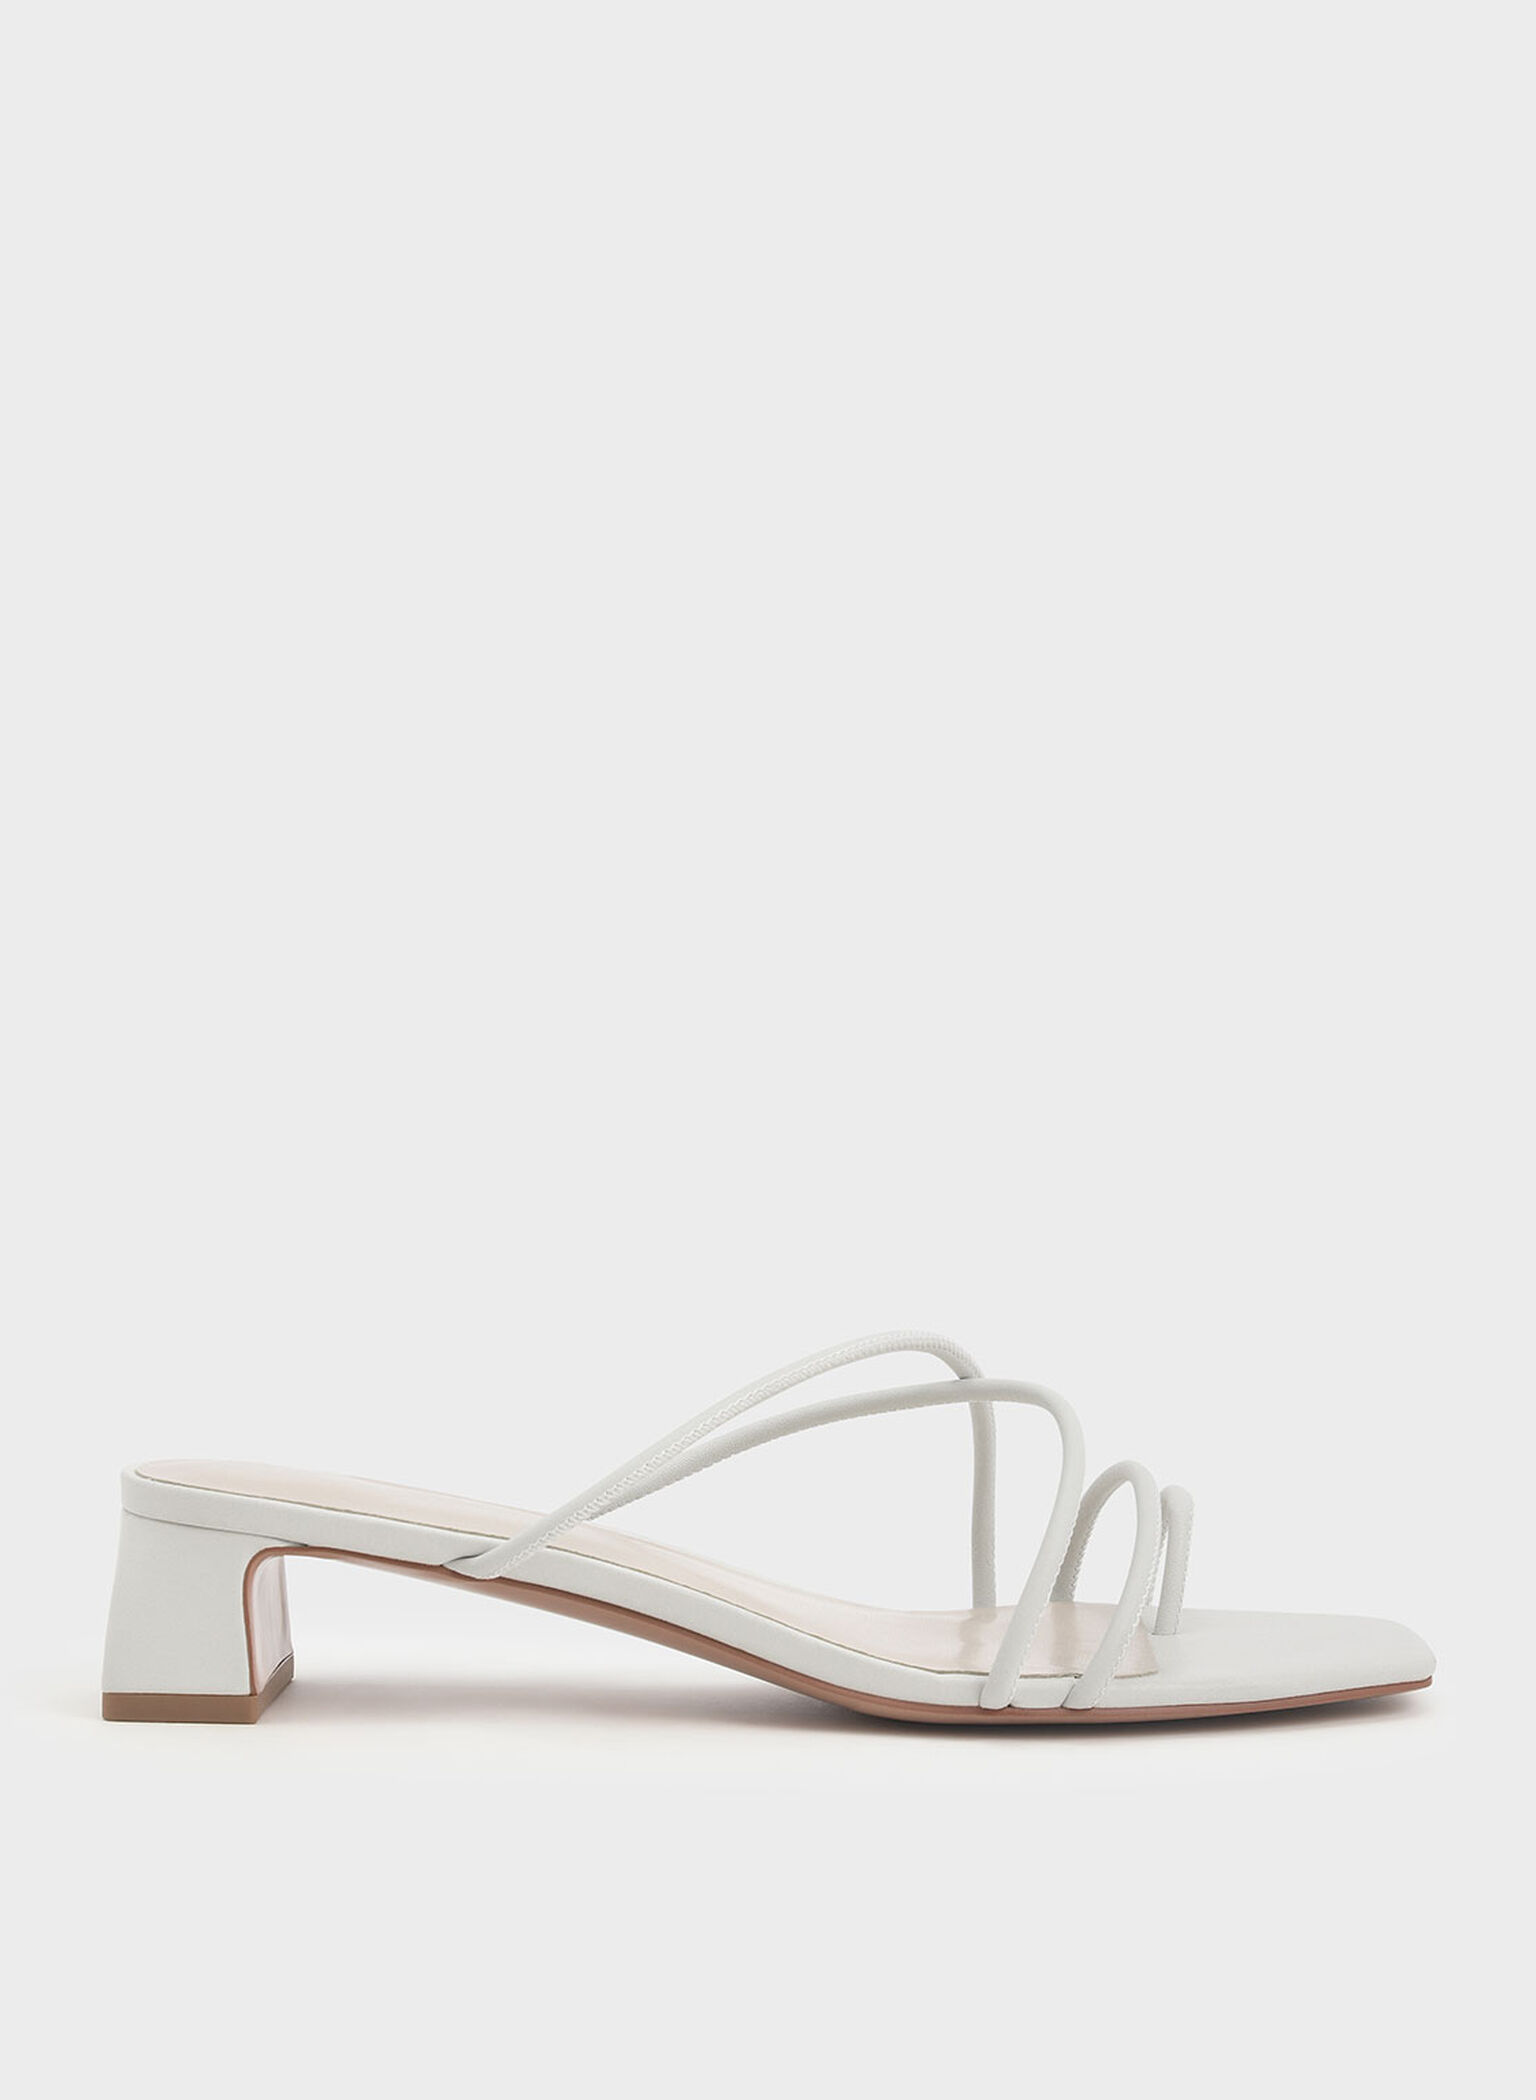 Charles & Keith - Women's Strappy Toe Ring Sandals, White, US 8